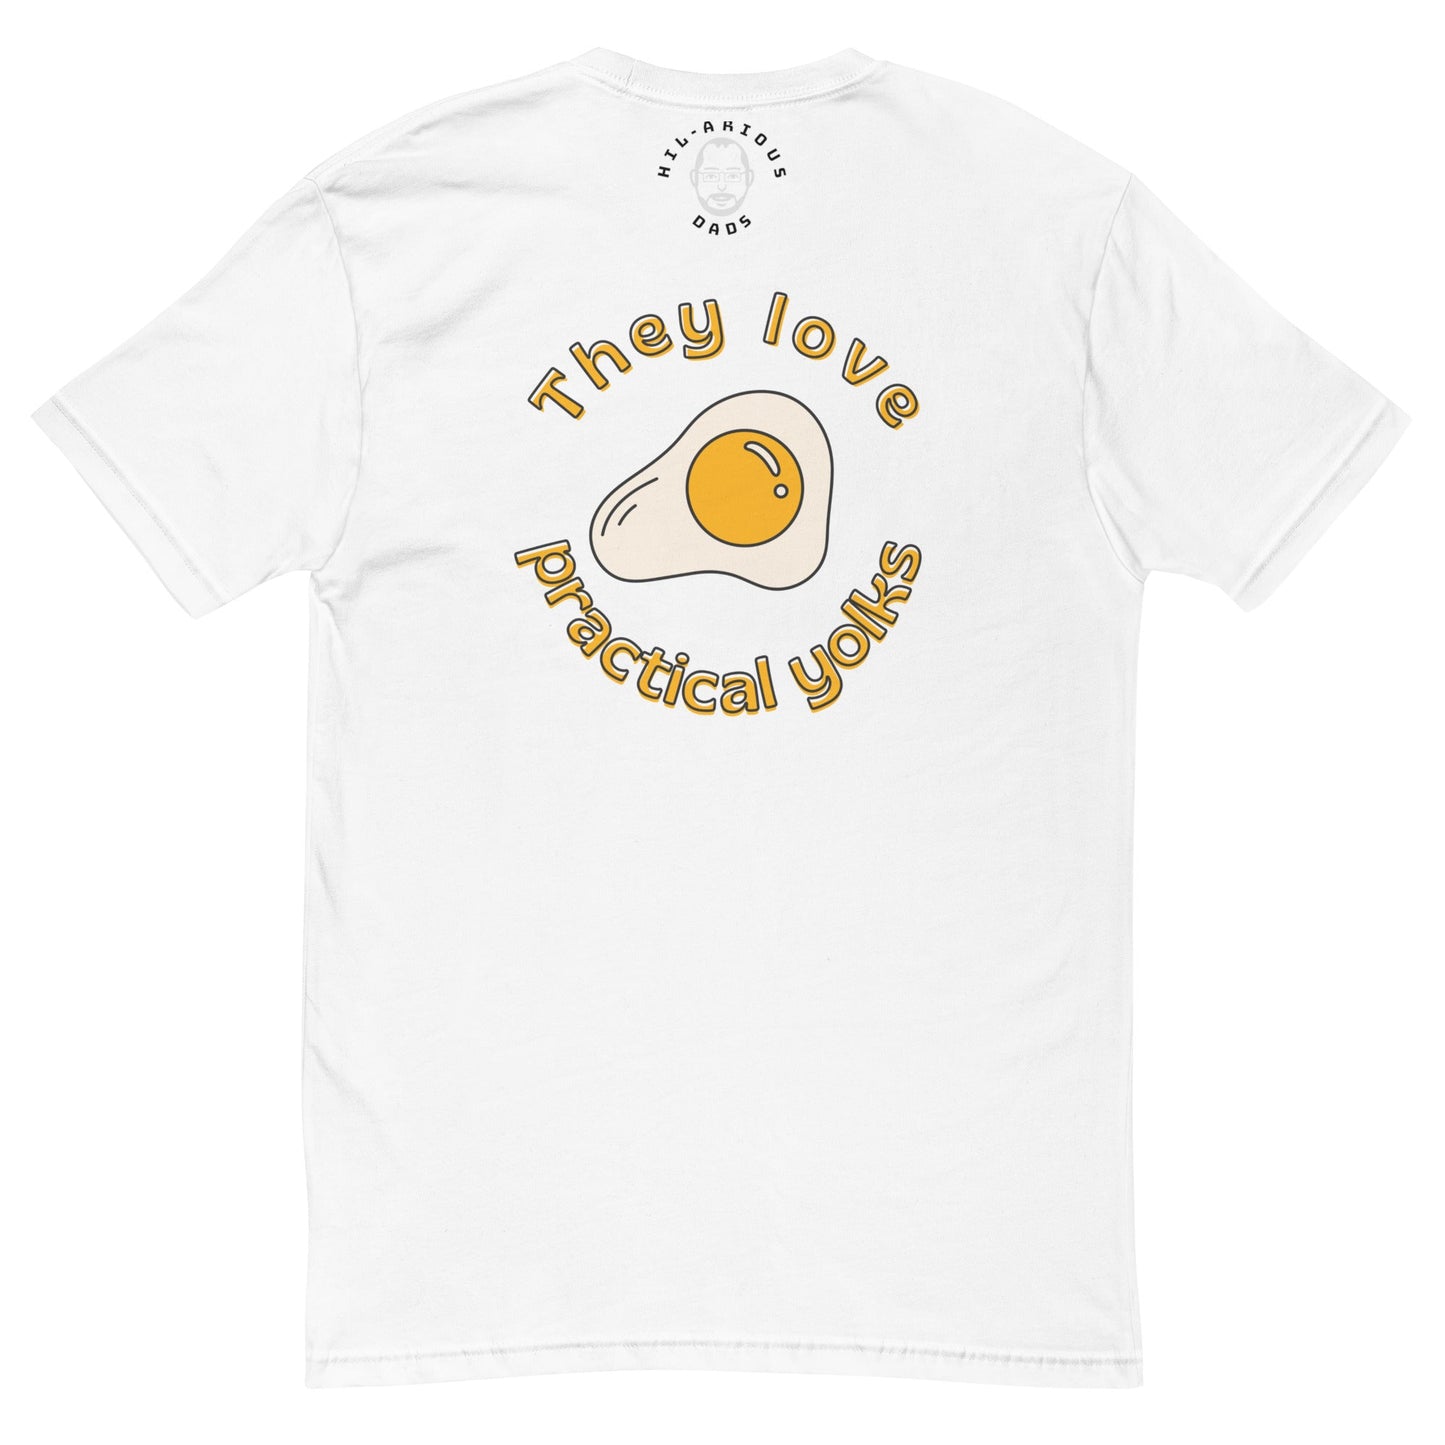 Why do eggs like April Fools day?-T-shirt - Hil-arious Dads